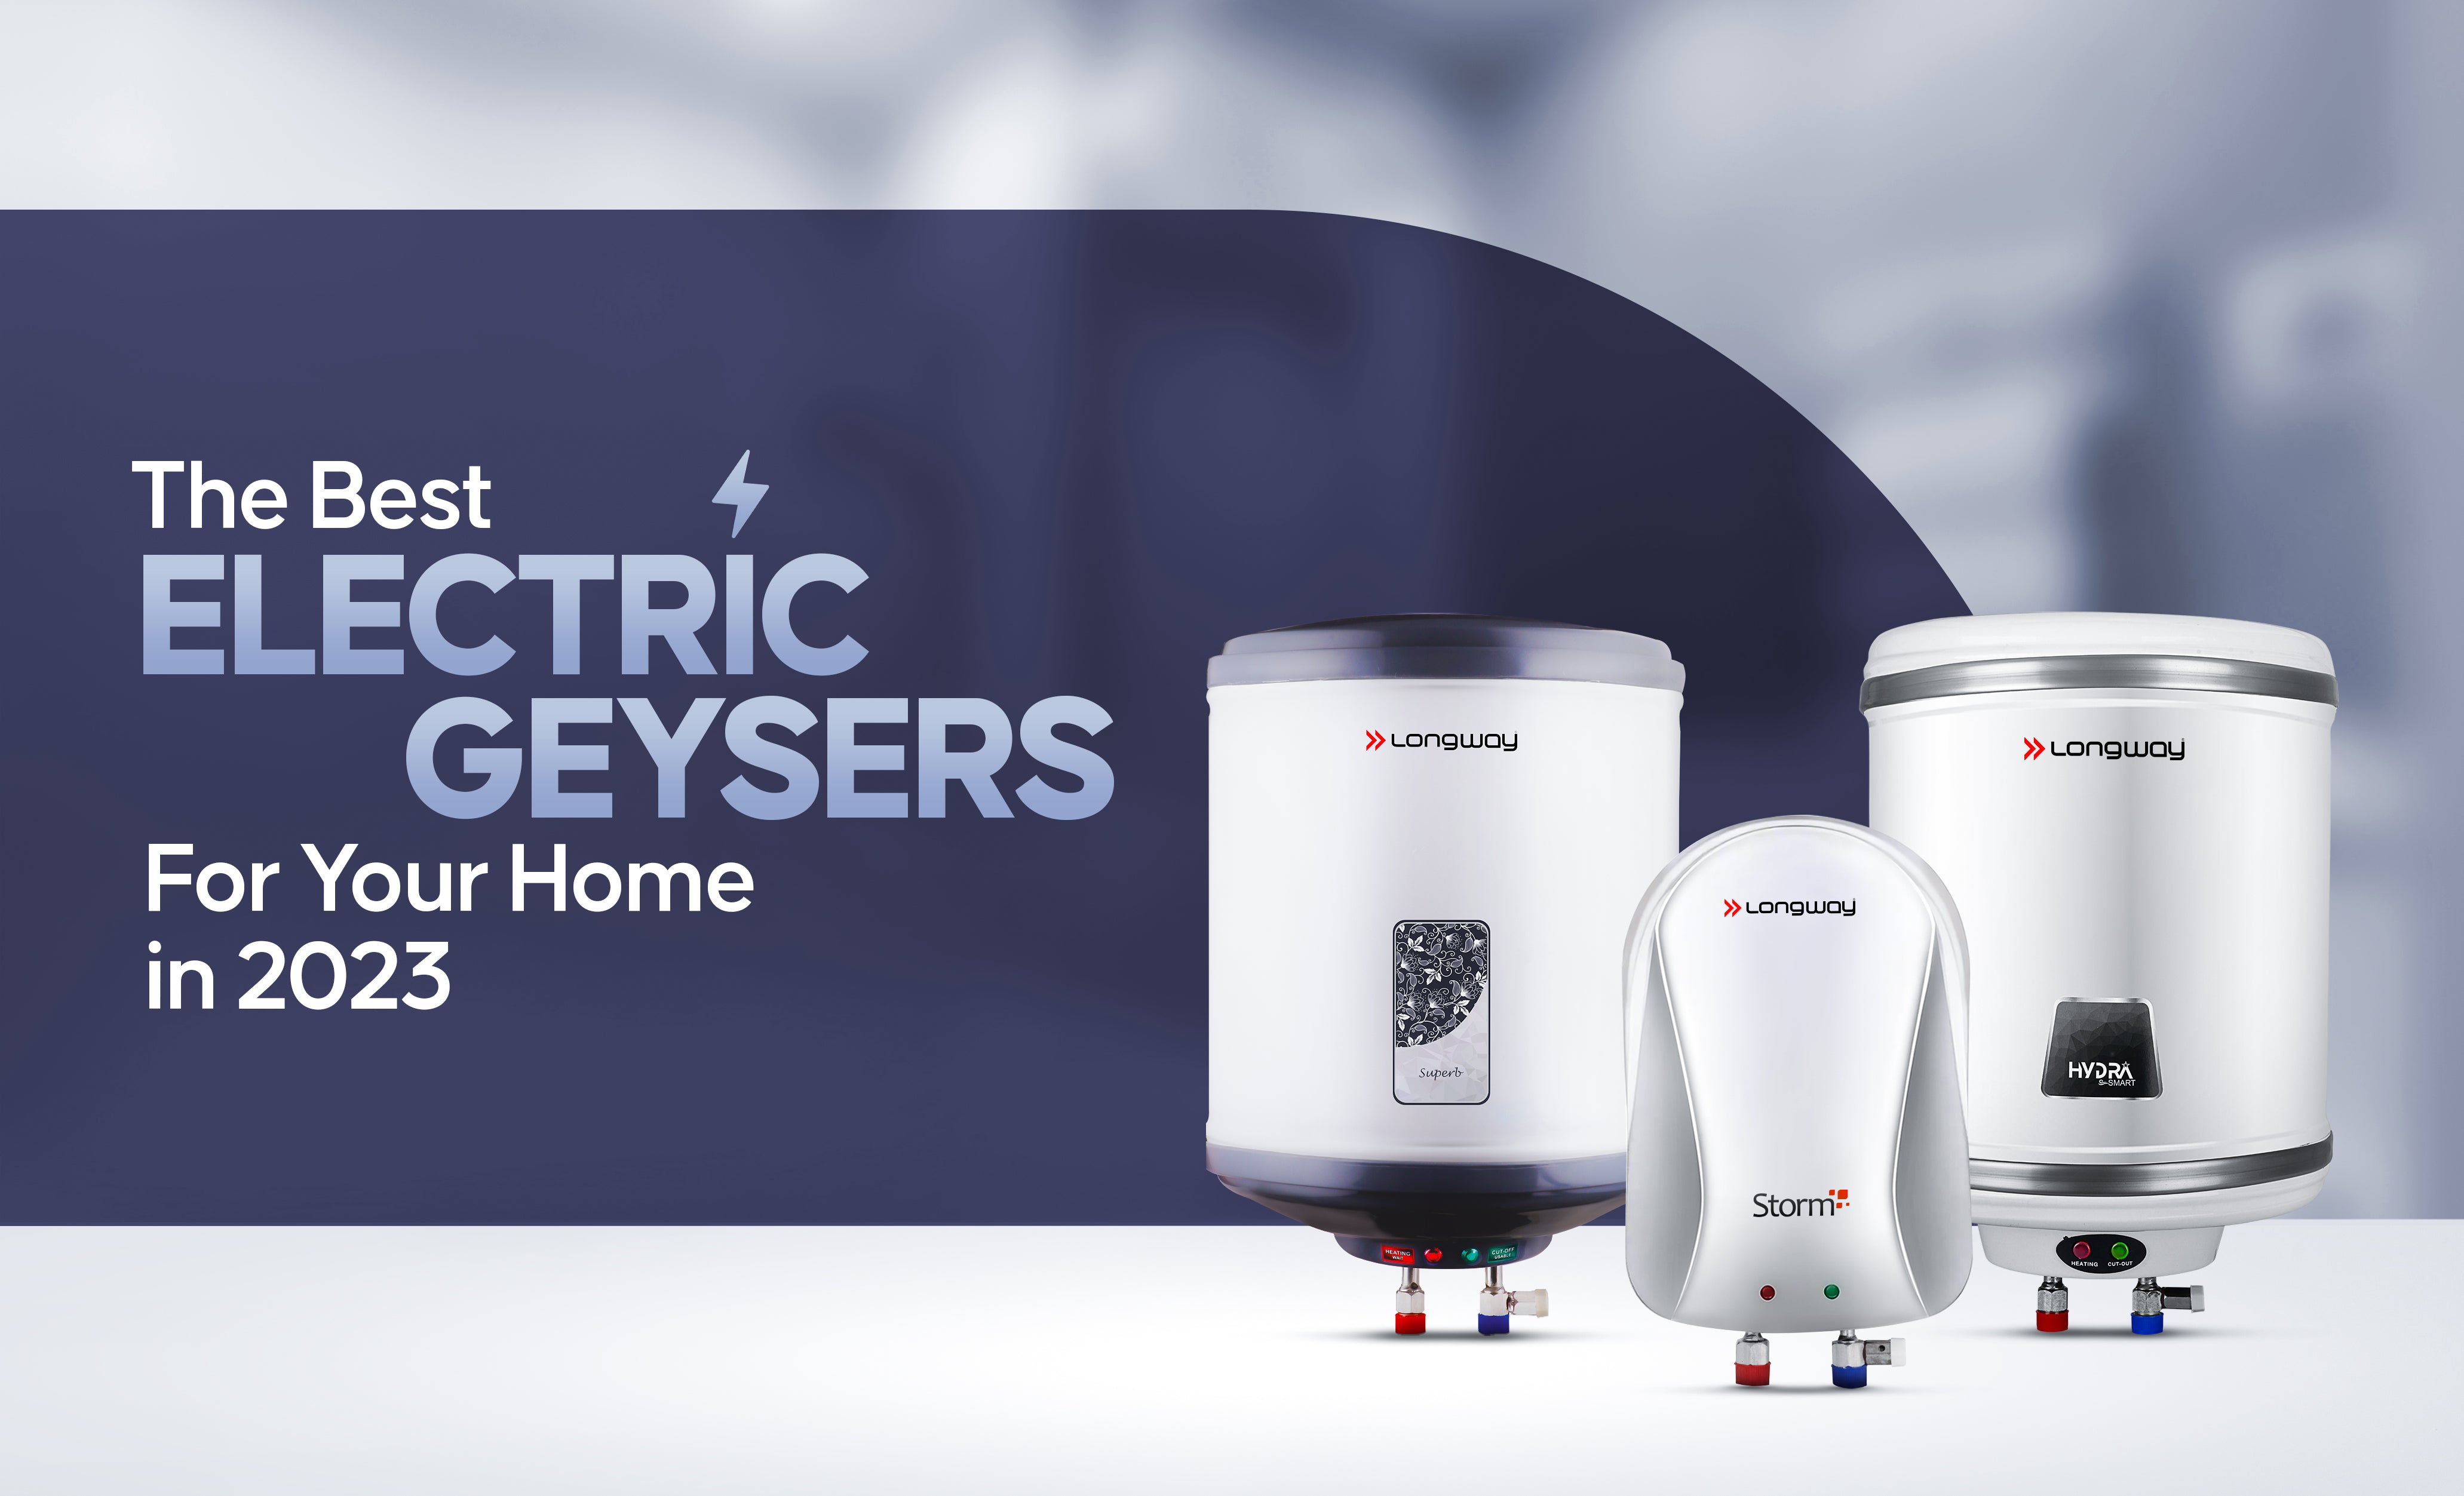 Best Electric Geysers for Your Home in 2023